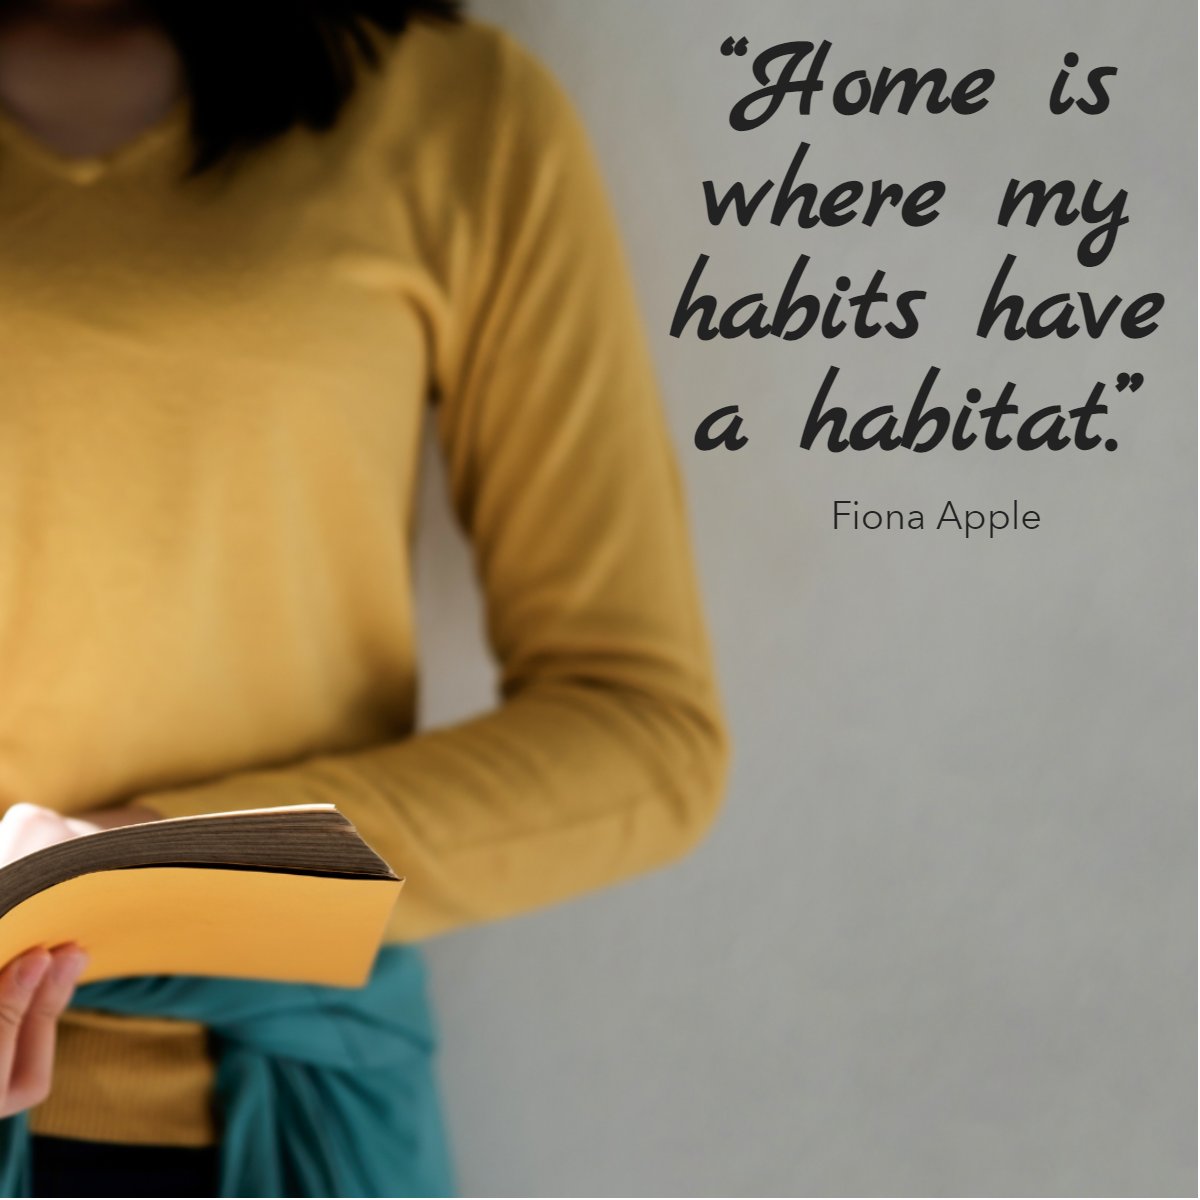 'Home is where my habits have a habitat.' 
― Fiona Apple 📖

#habits #realestate #realtor #buy #sell #homeowner #fun #inspiring #quoteoftheday #fionaapple